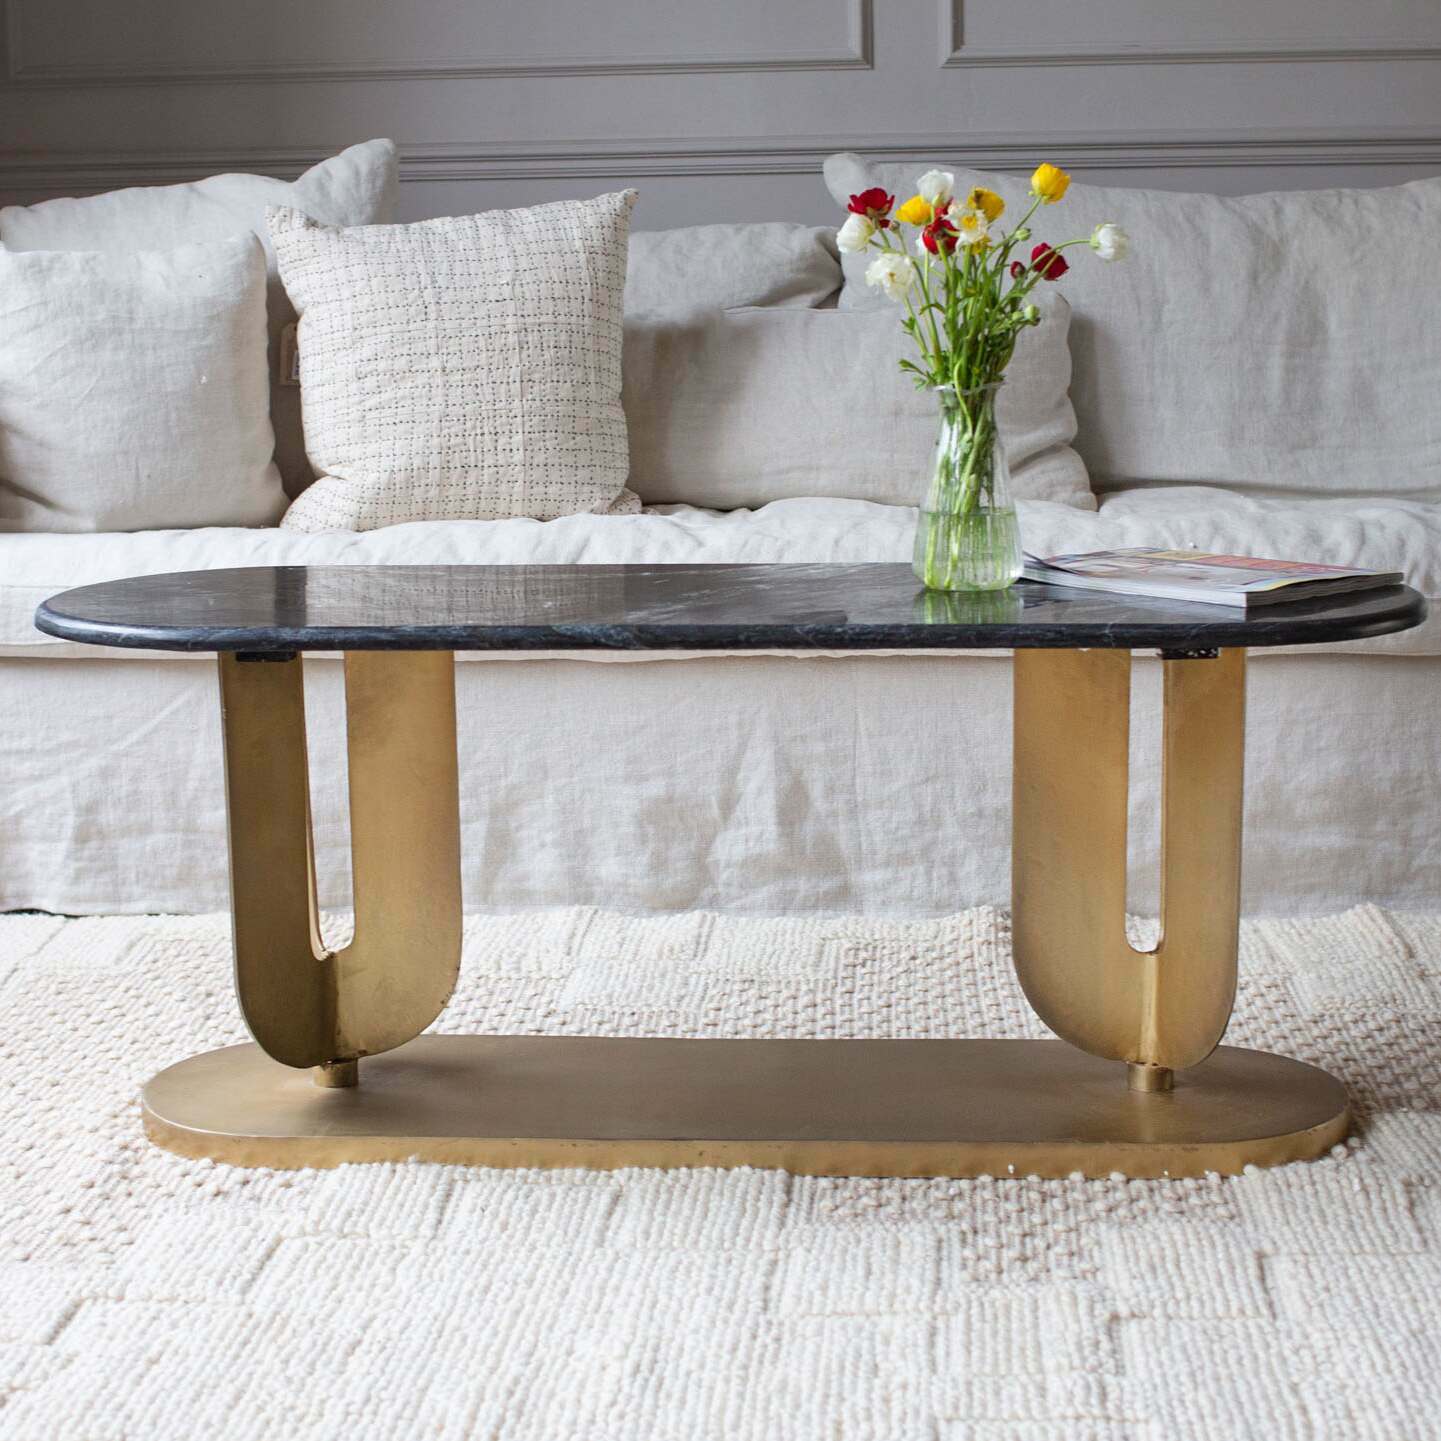 Photo of Graham and green hollywood marble coffee table